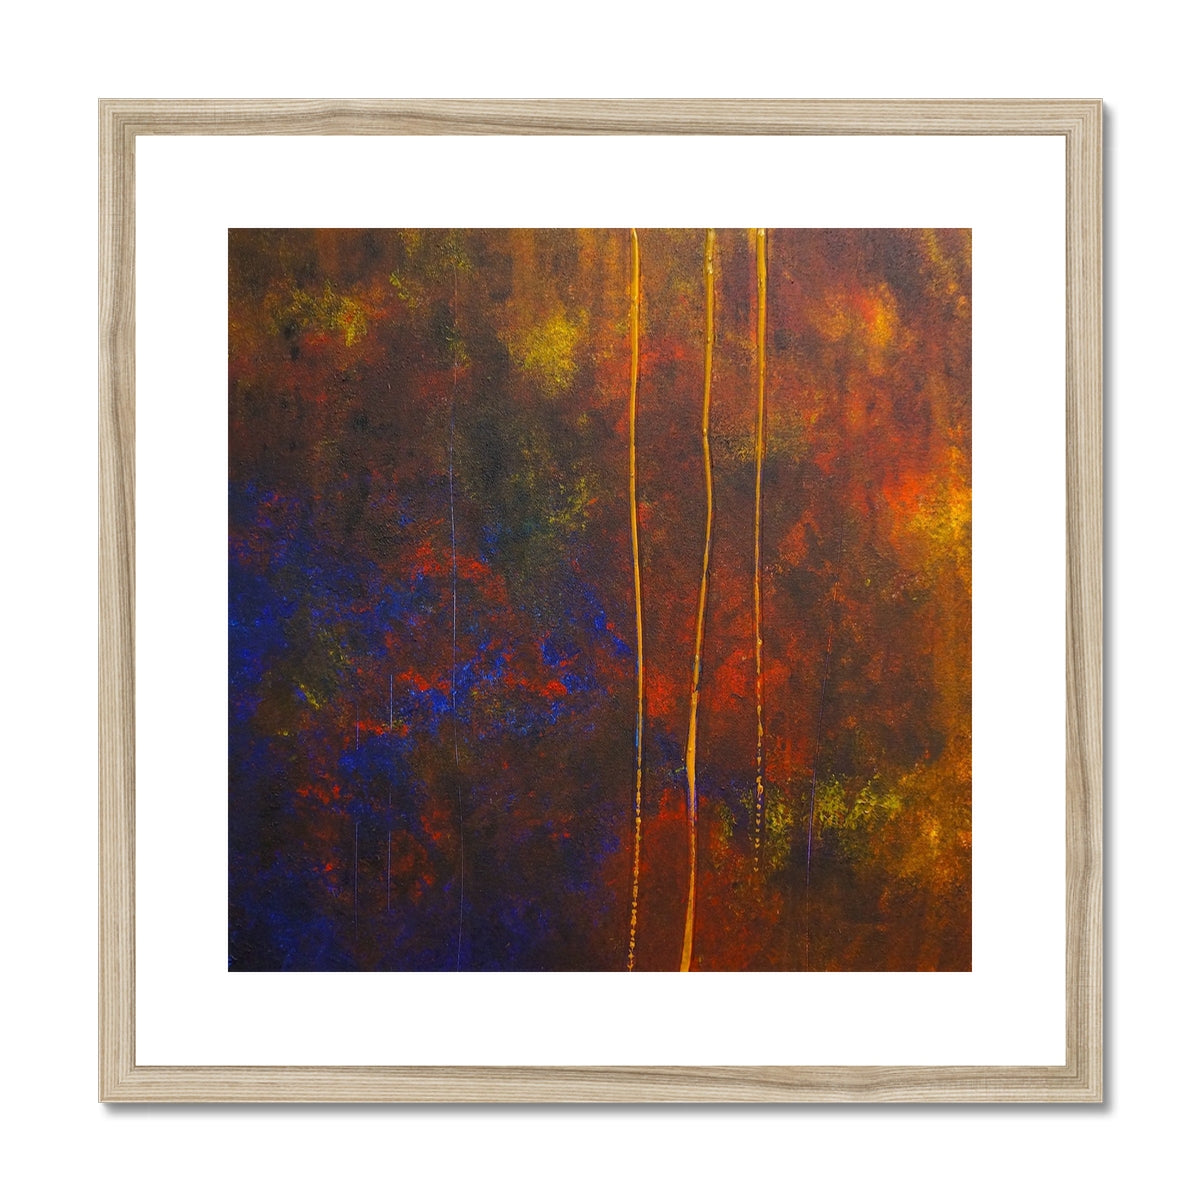 The Autumn Wood Abstract Painting | Framed & Mounted Prints From Scotland-Framed & Mounted Prints-Abstract & Impressionistic Art Gallery-20"x20"-Natural Frame-Paintings, Prints, Homeware, Art Gifts From Scotland By Scottish Artist Kevin Hunter